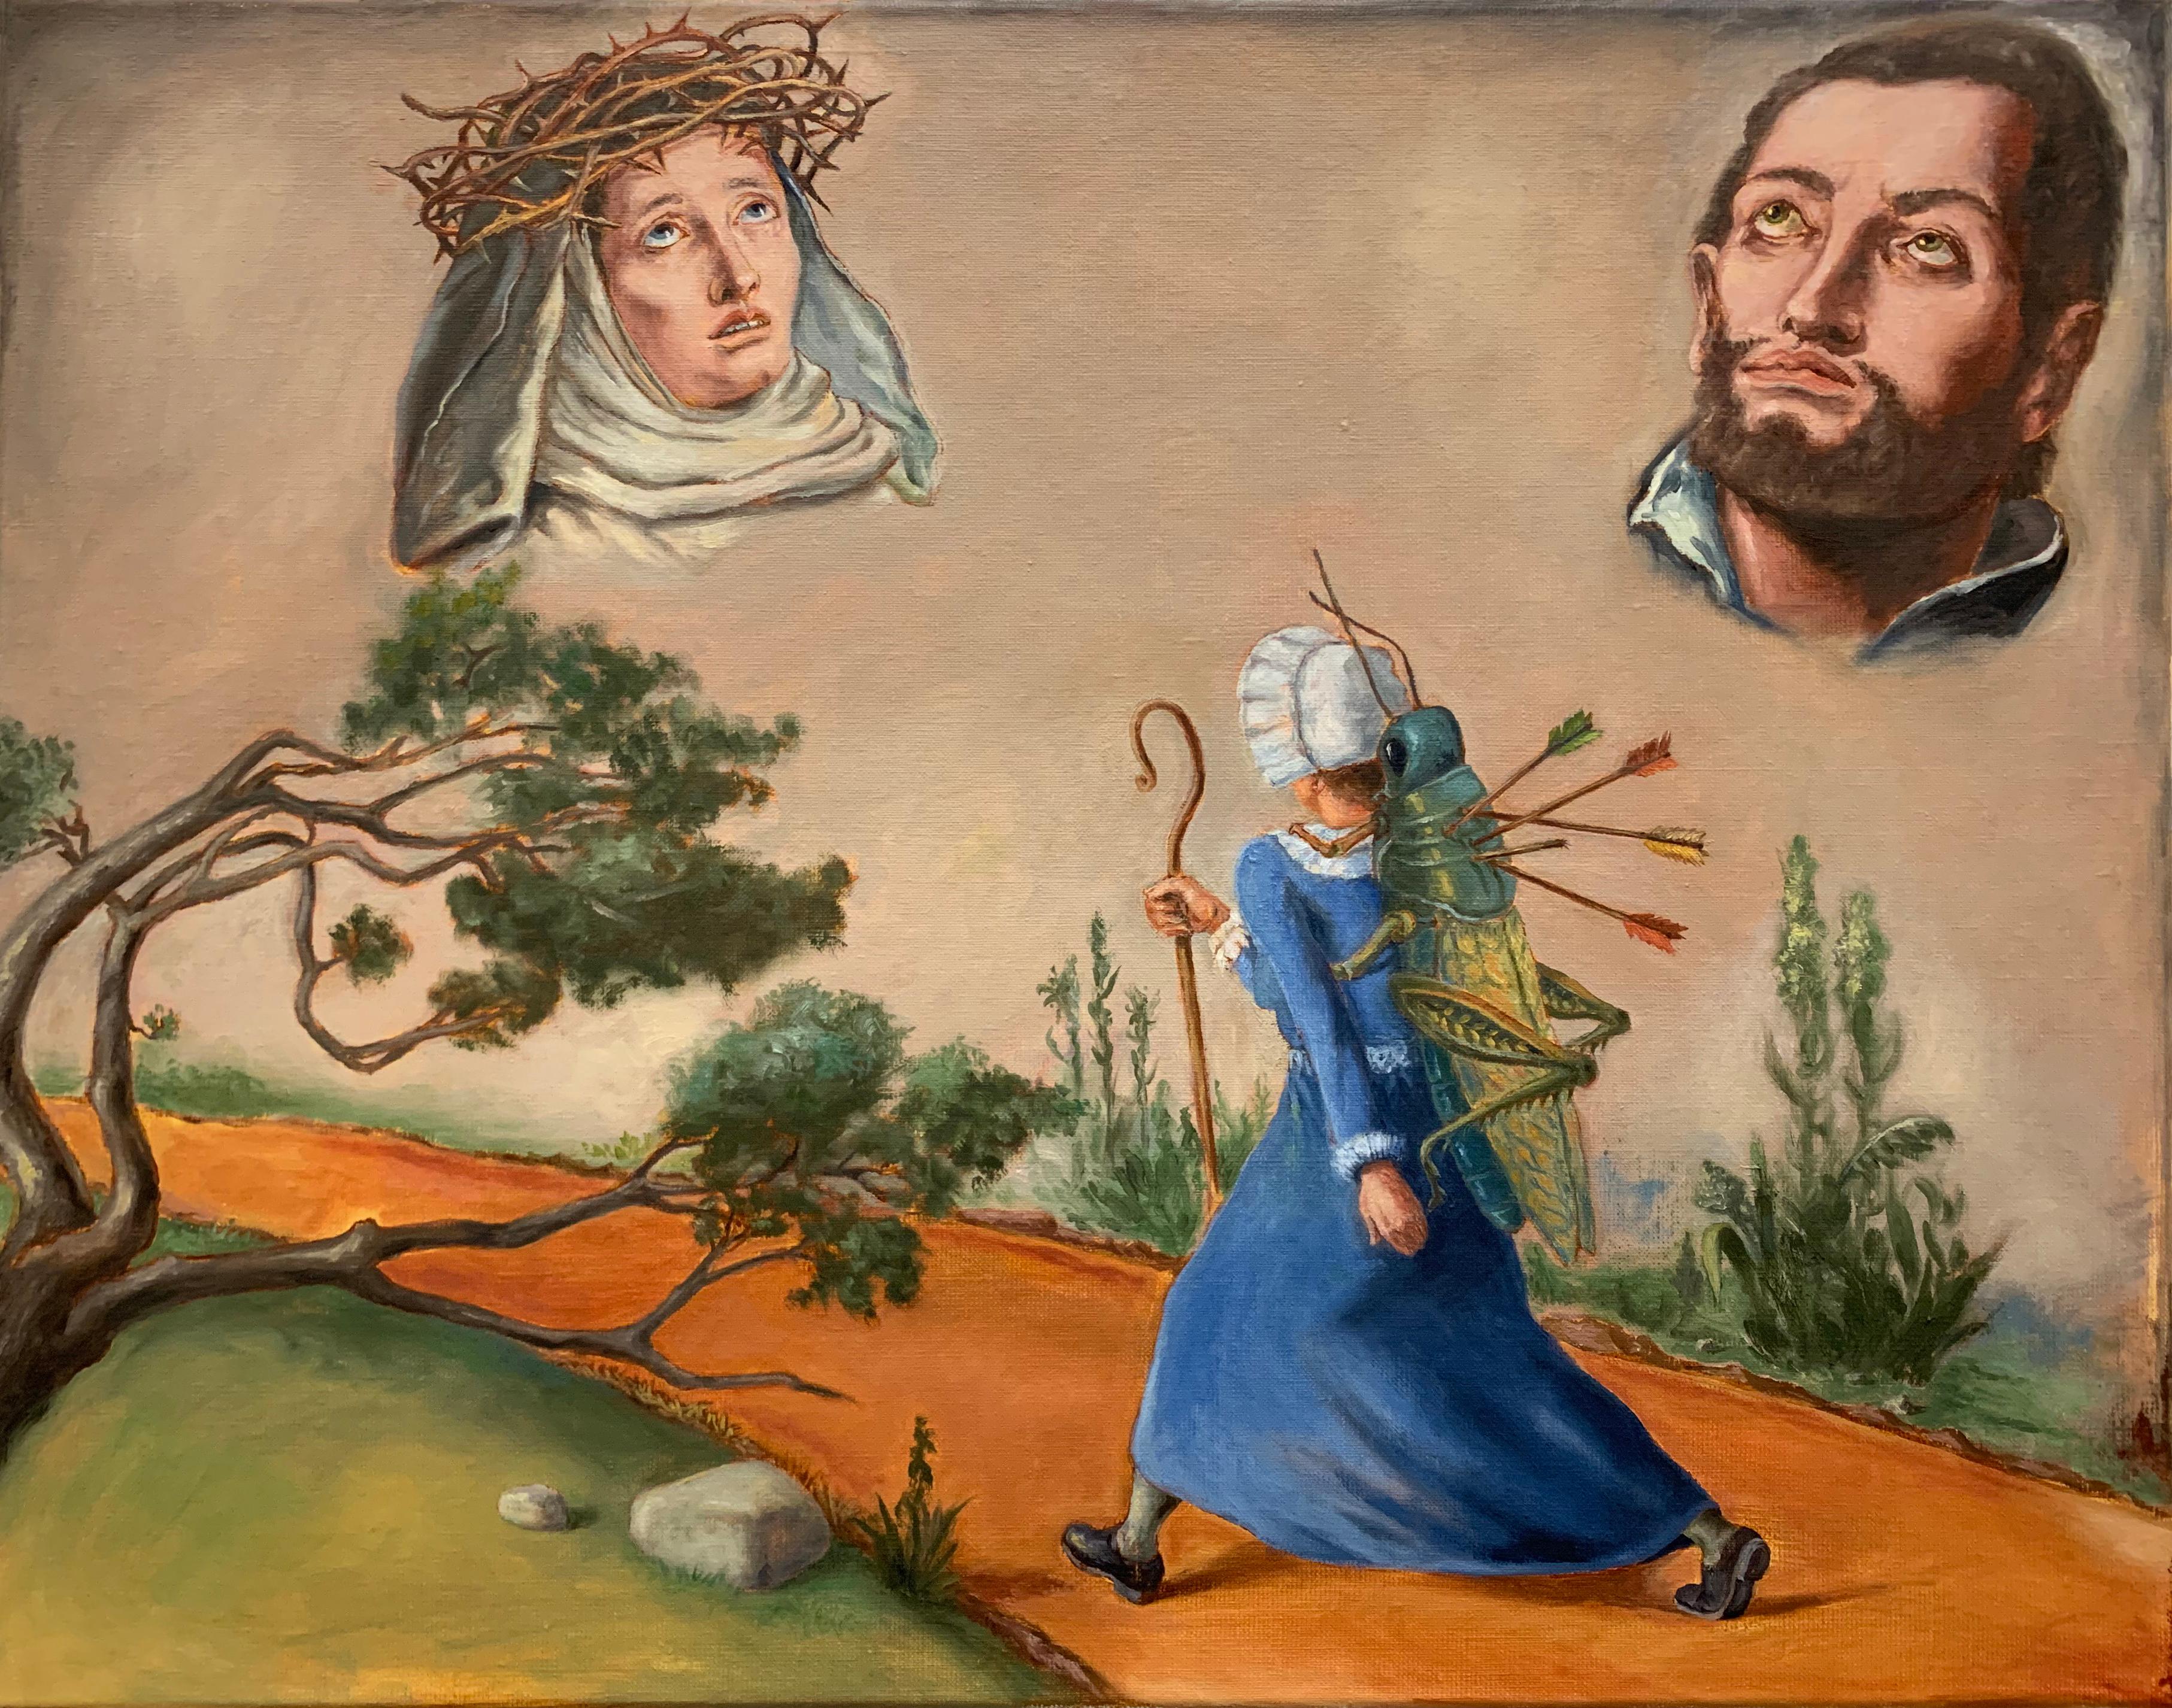 Tony Geiger Figurative Painting - "TO THE INFIRMARY", surrealist painting, saints, insects, path, dream, religious